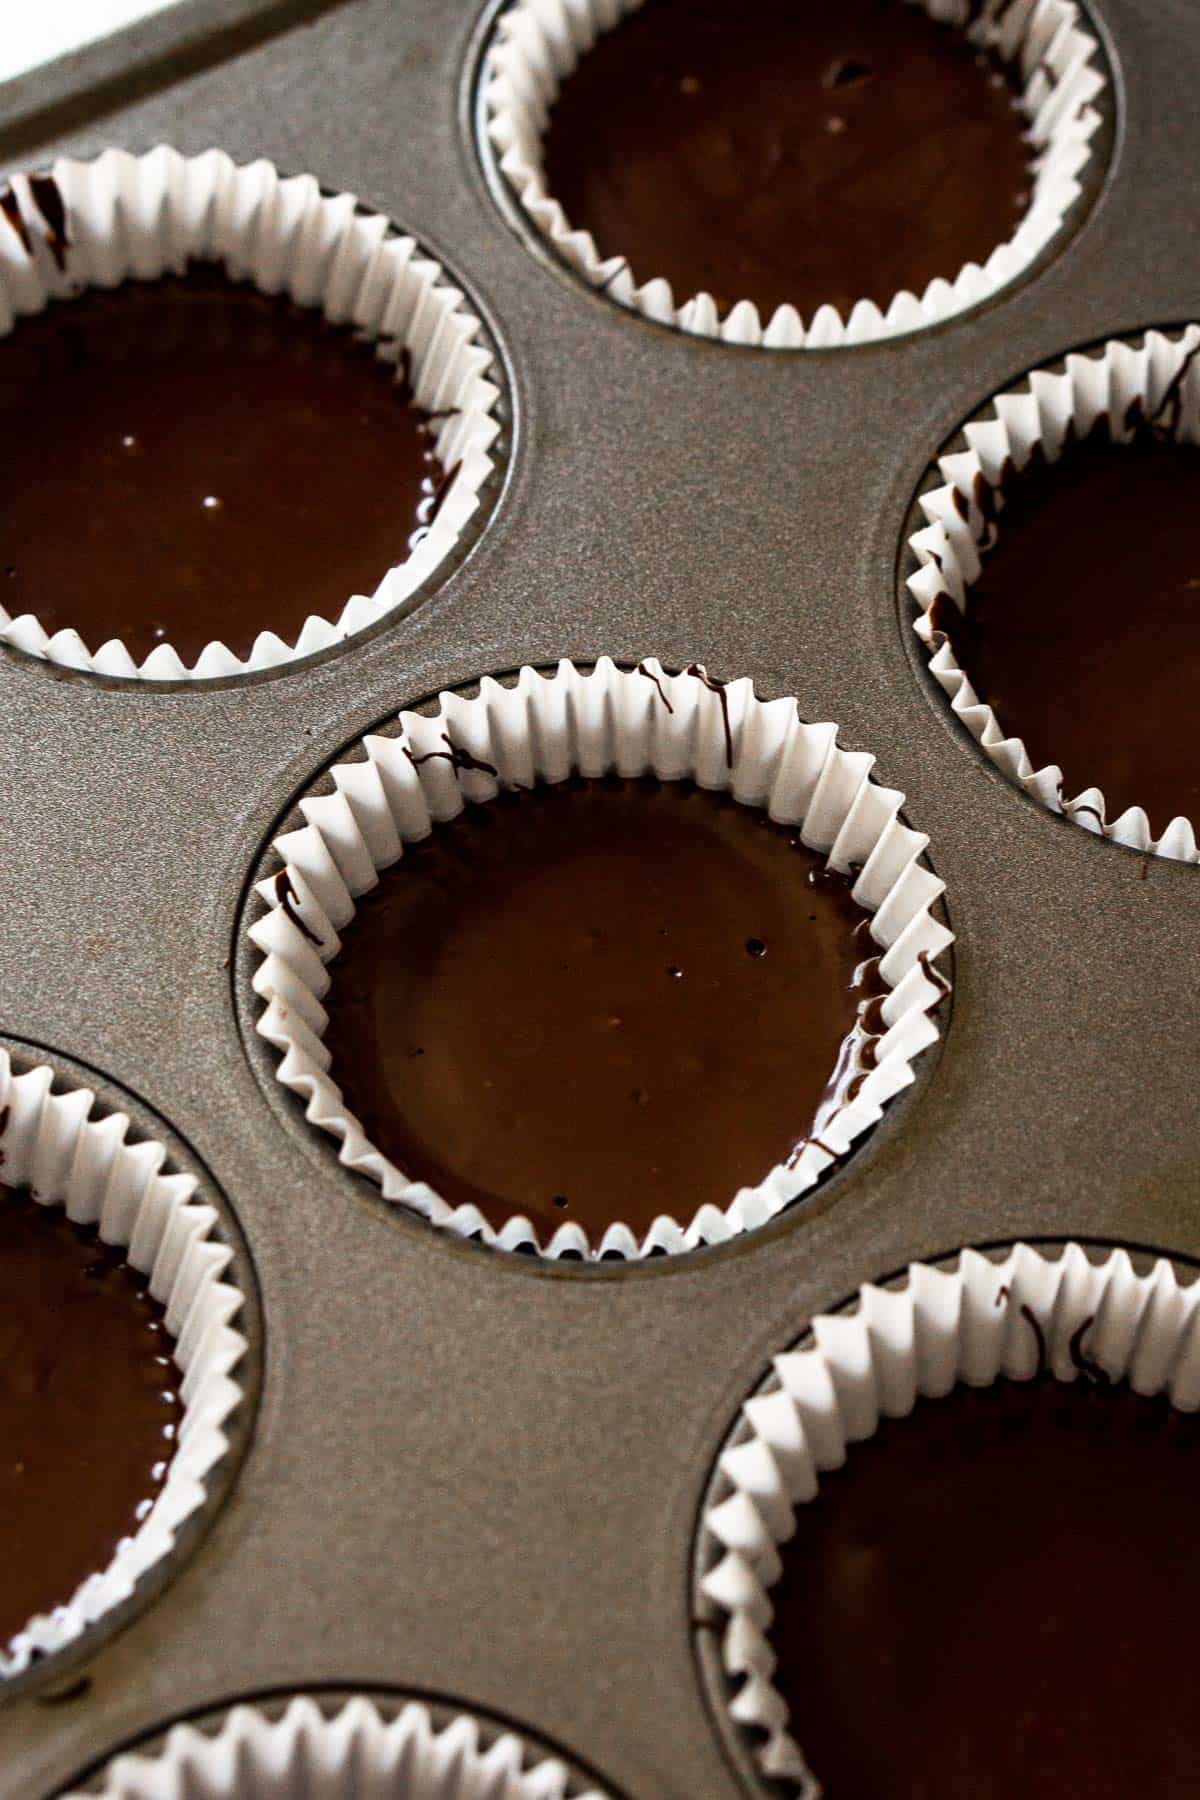 Process image of almond butter cups being assembled